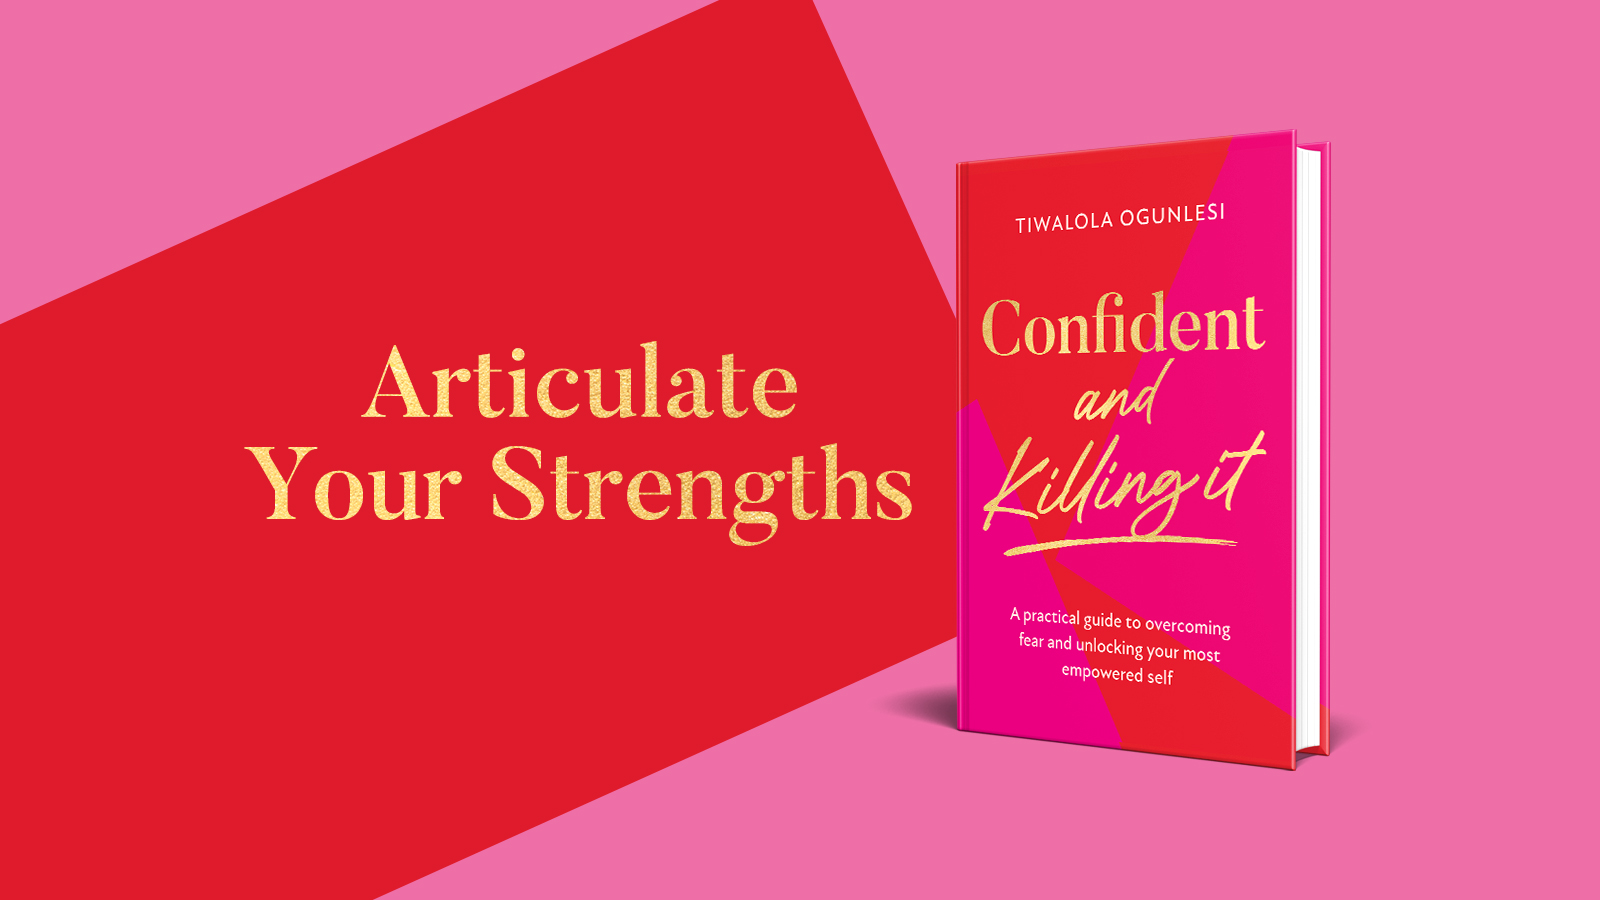 Confident and Killing It - Articulate Your Strenghths